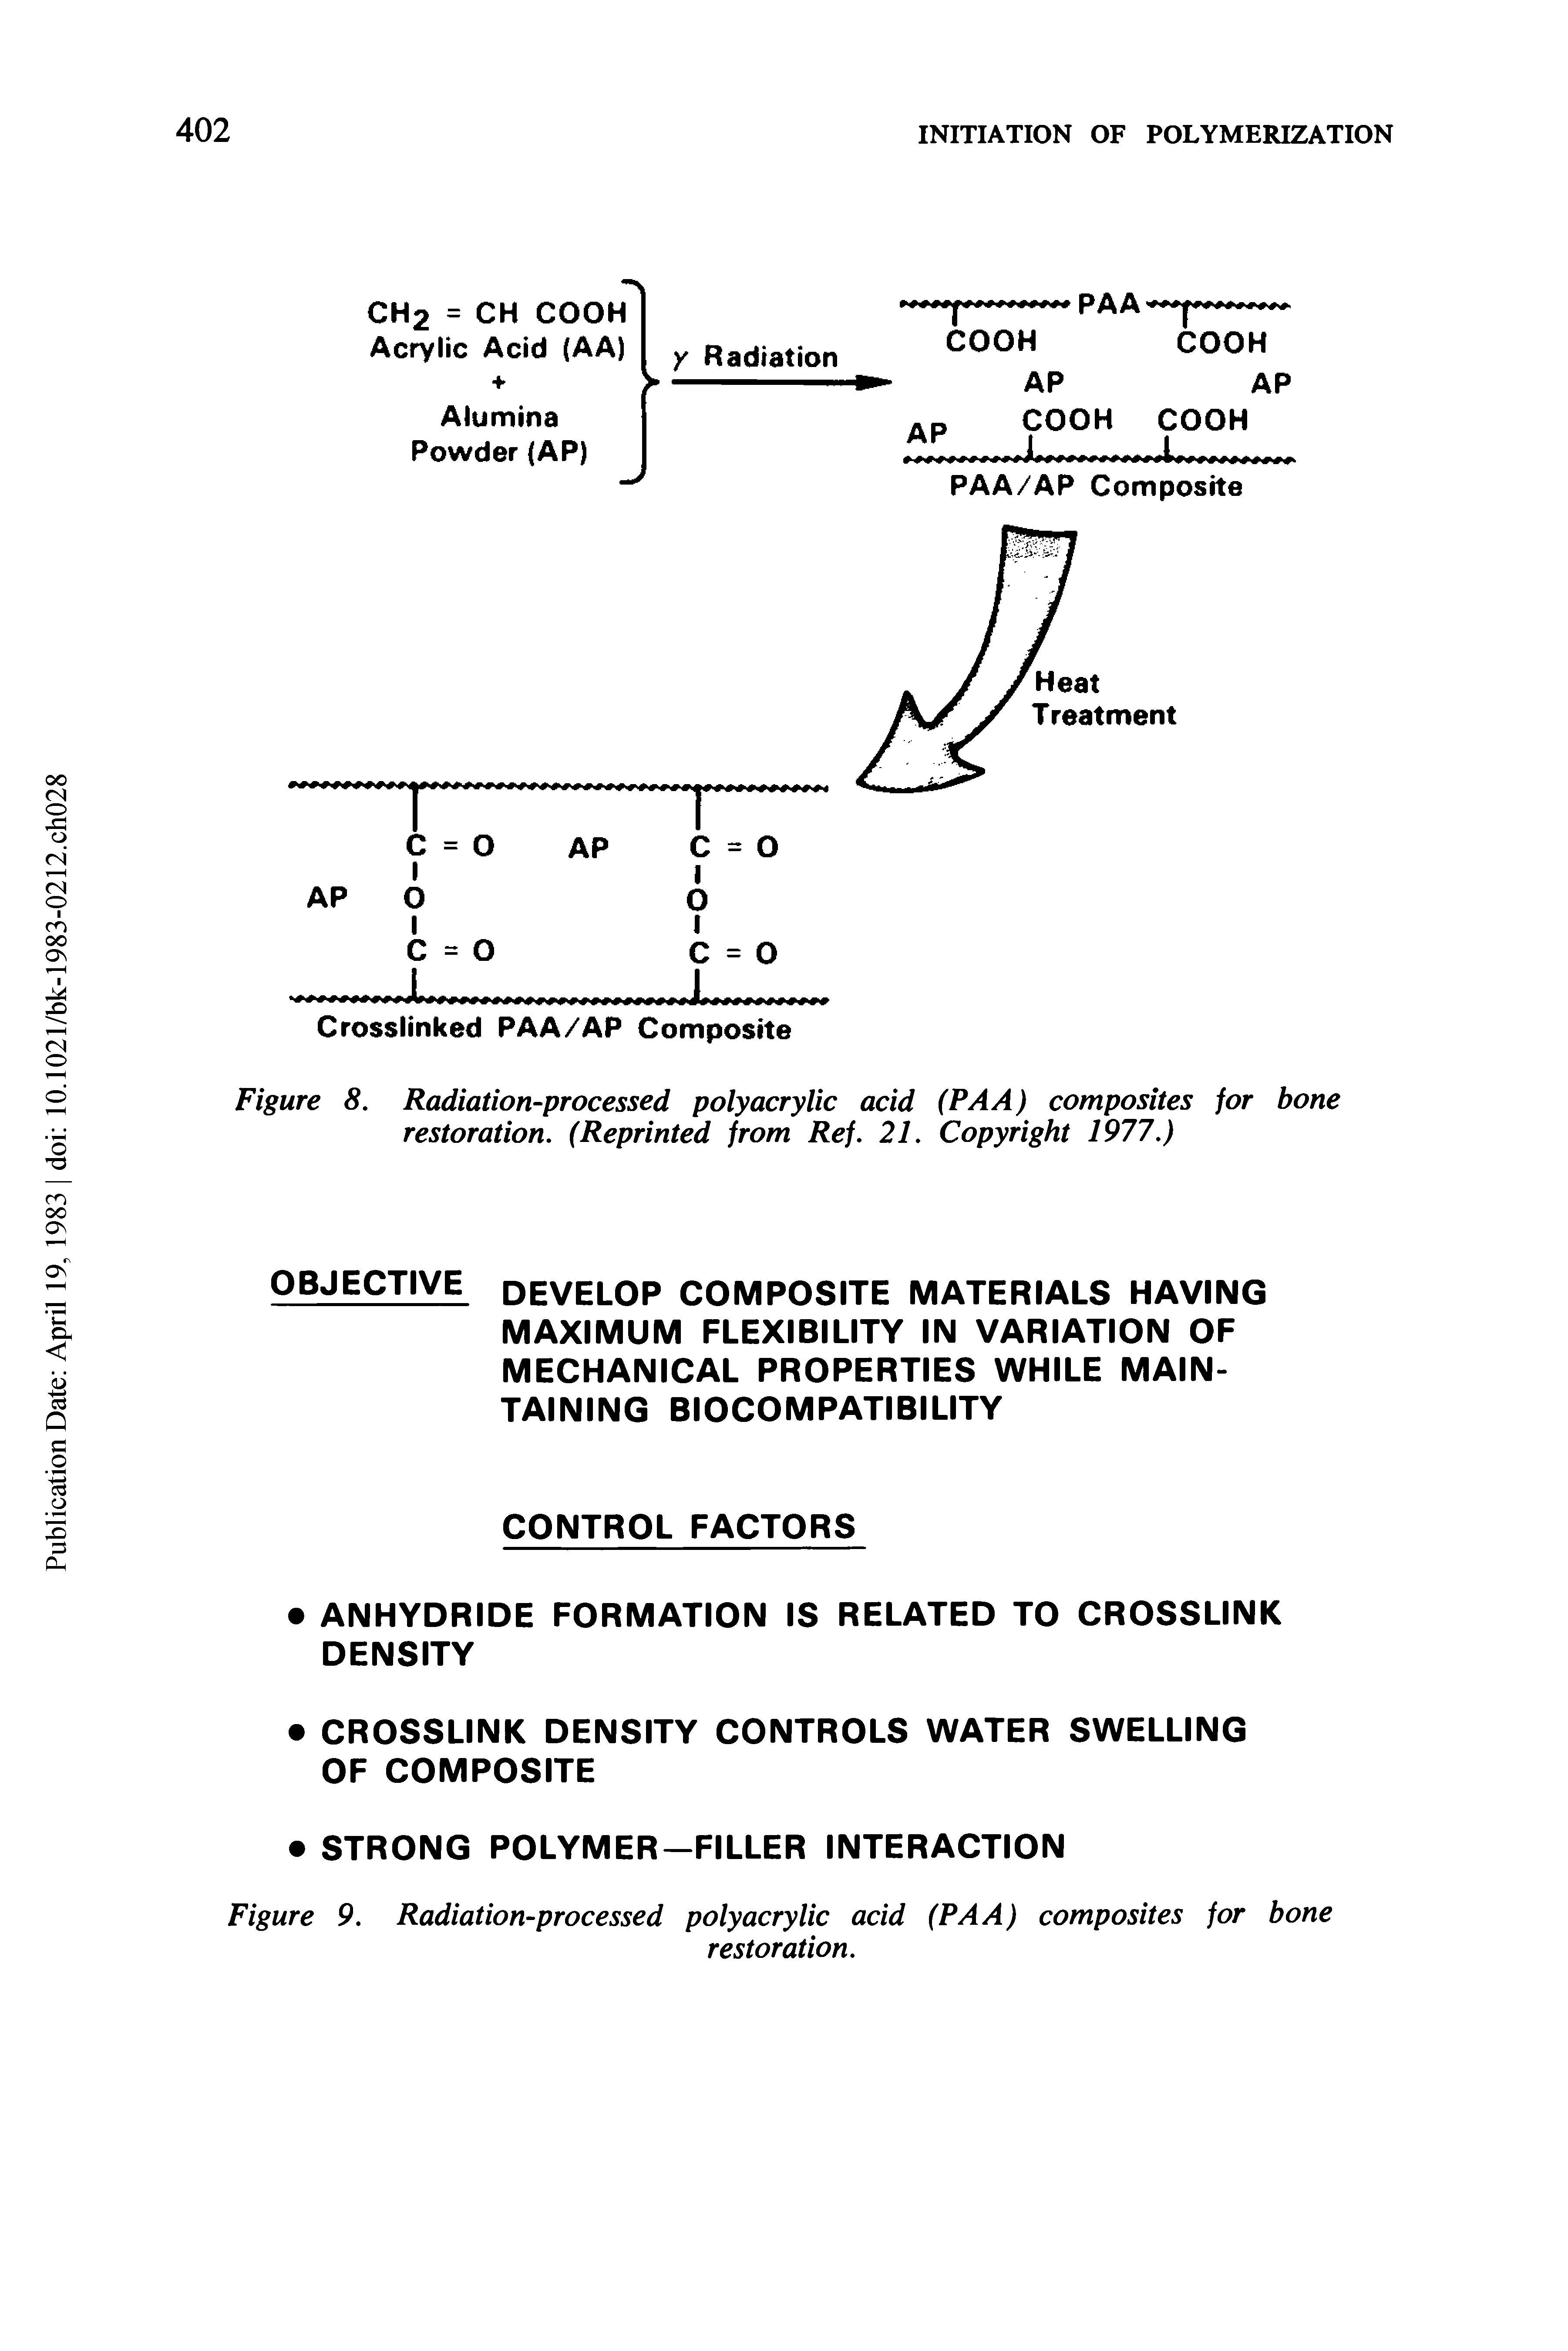 Figure 8. Radiation-processed poly aery lie acid (PA A) composites for bone restoration. (Reprinted from Ref. 21. Copyright 1977.)...